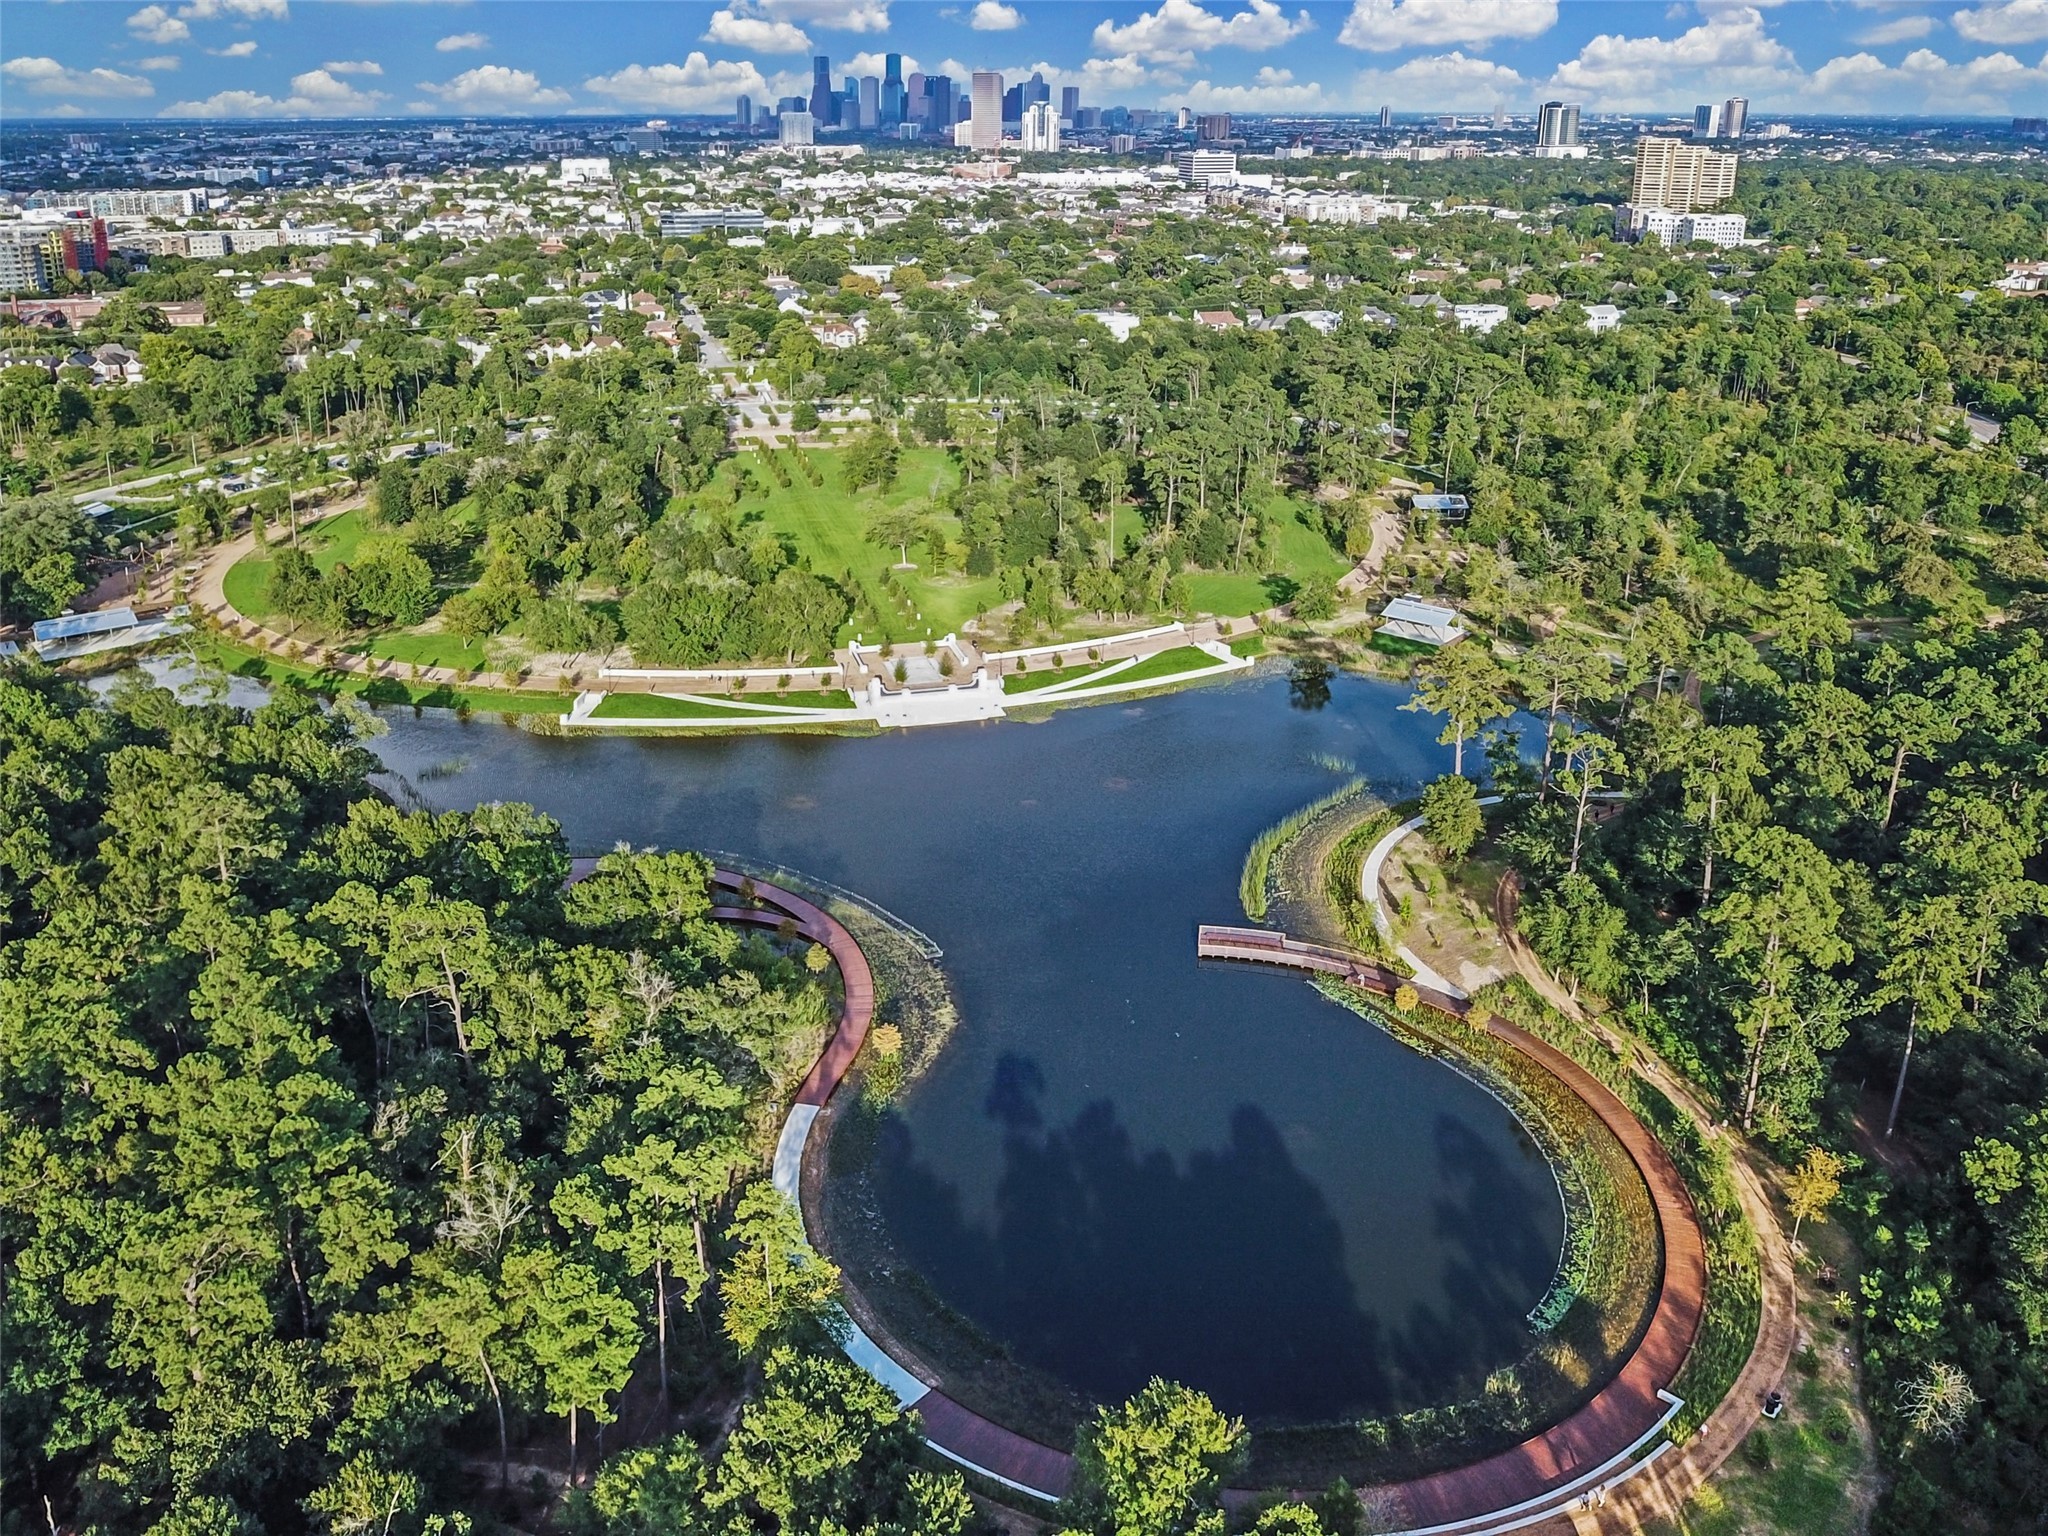 Palisades Park: Located in one of Houston's most desirable neighborhoods. Easy access to all major highways, the community is only minutes from Memorial Park, The Heights, Galleria, Downtown & Washington Corridor.